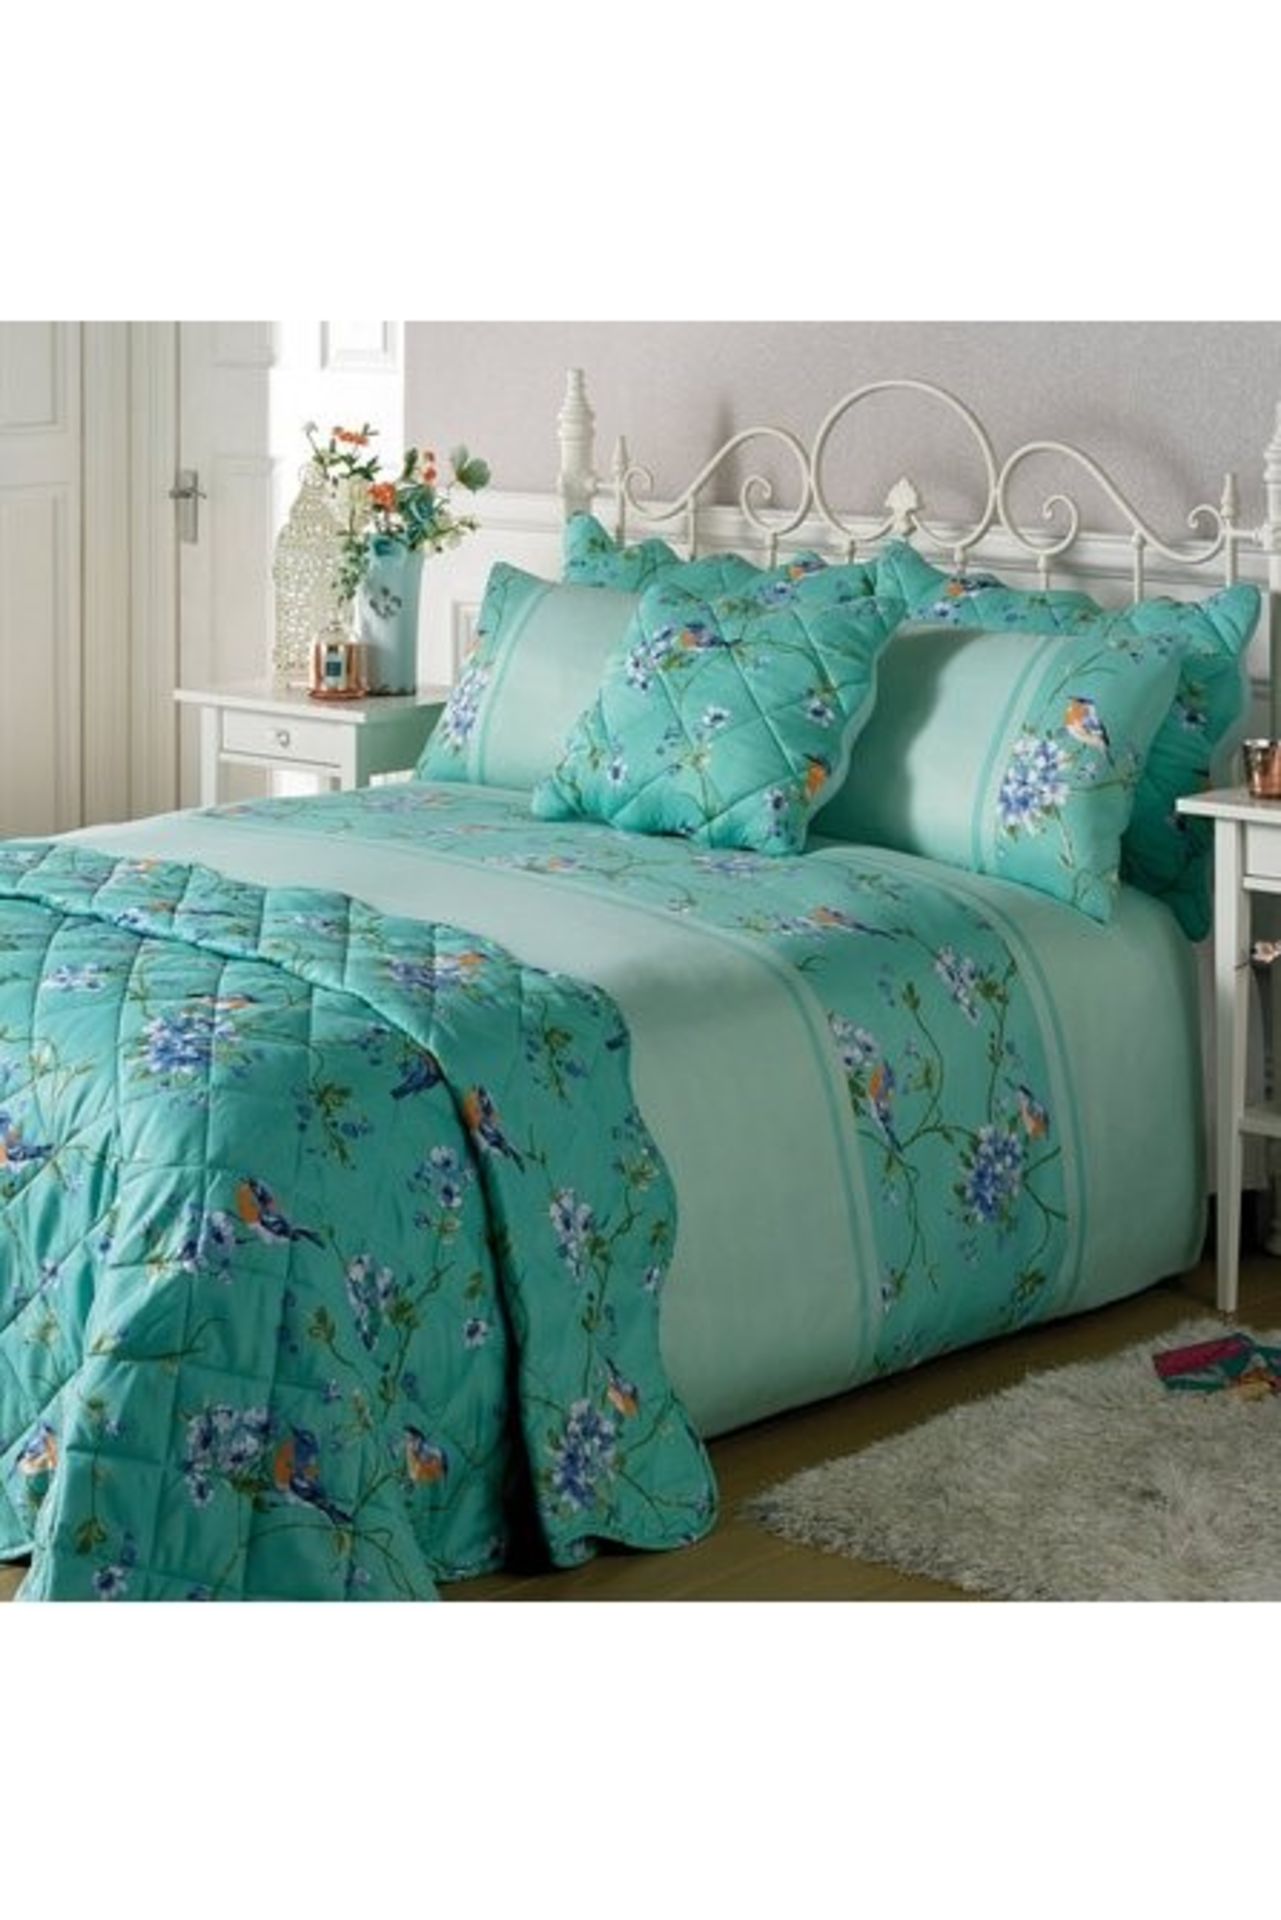 1 AS NEW BAGGED BIRD BLOSSOM DUVET SET IN DUCK EGG / DOUBLE (PUBLIC VIEWING AVAILABLE)